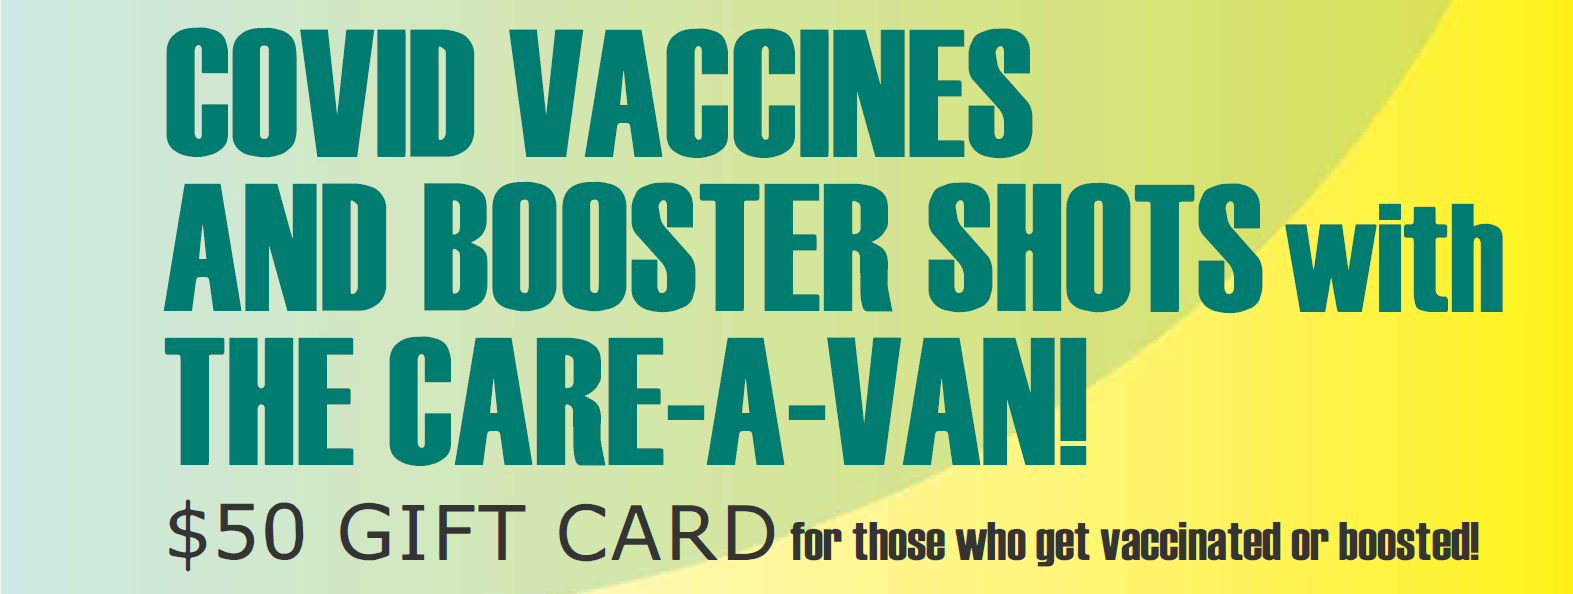 Headline graphic with teal typograhy: "COVID VACCINES AND BOOSTER SHOTS with THE CARE-A-VAN! $50 Gift Card for those who get vaccinated or boosted!